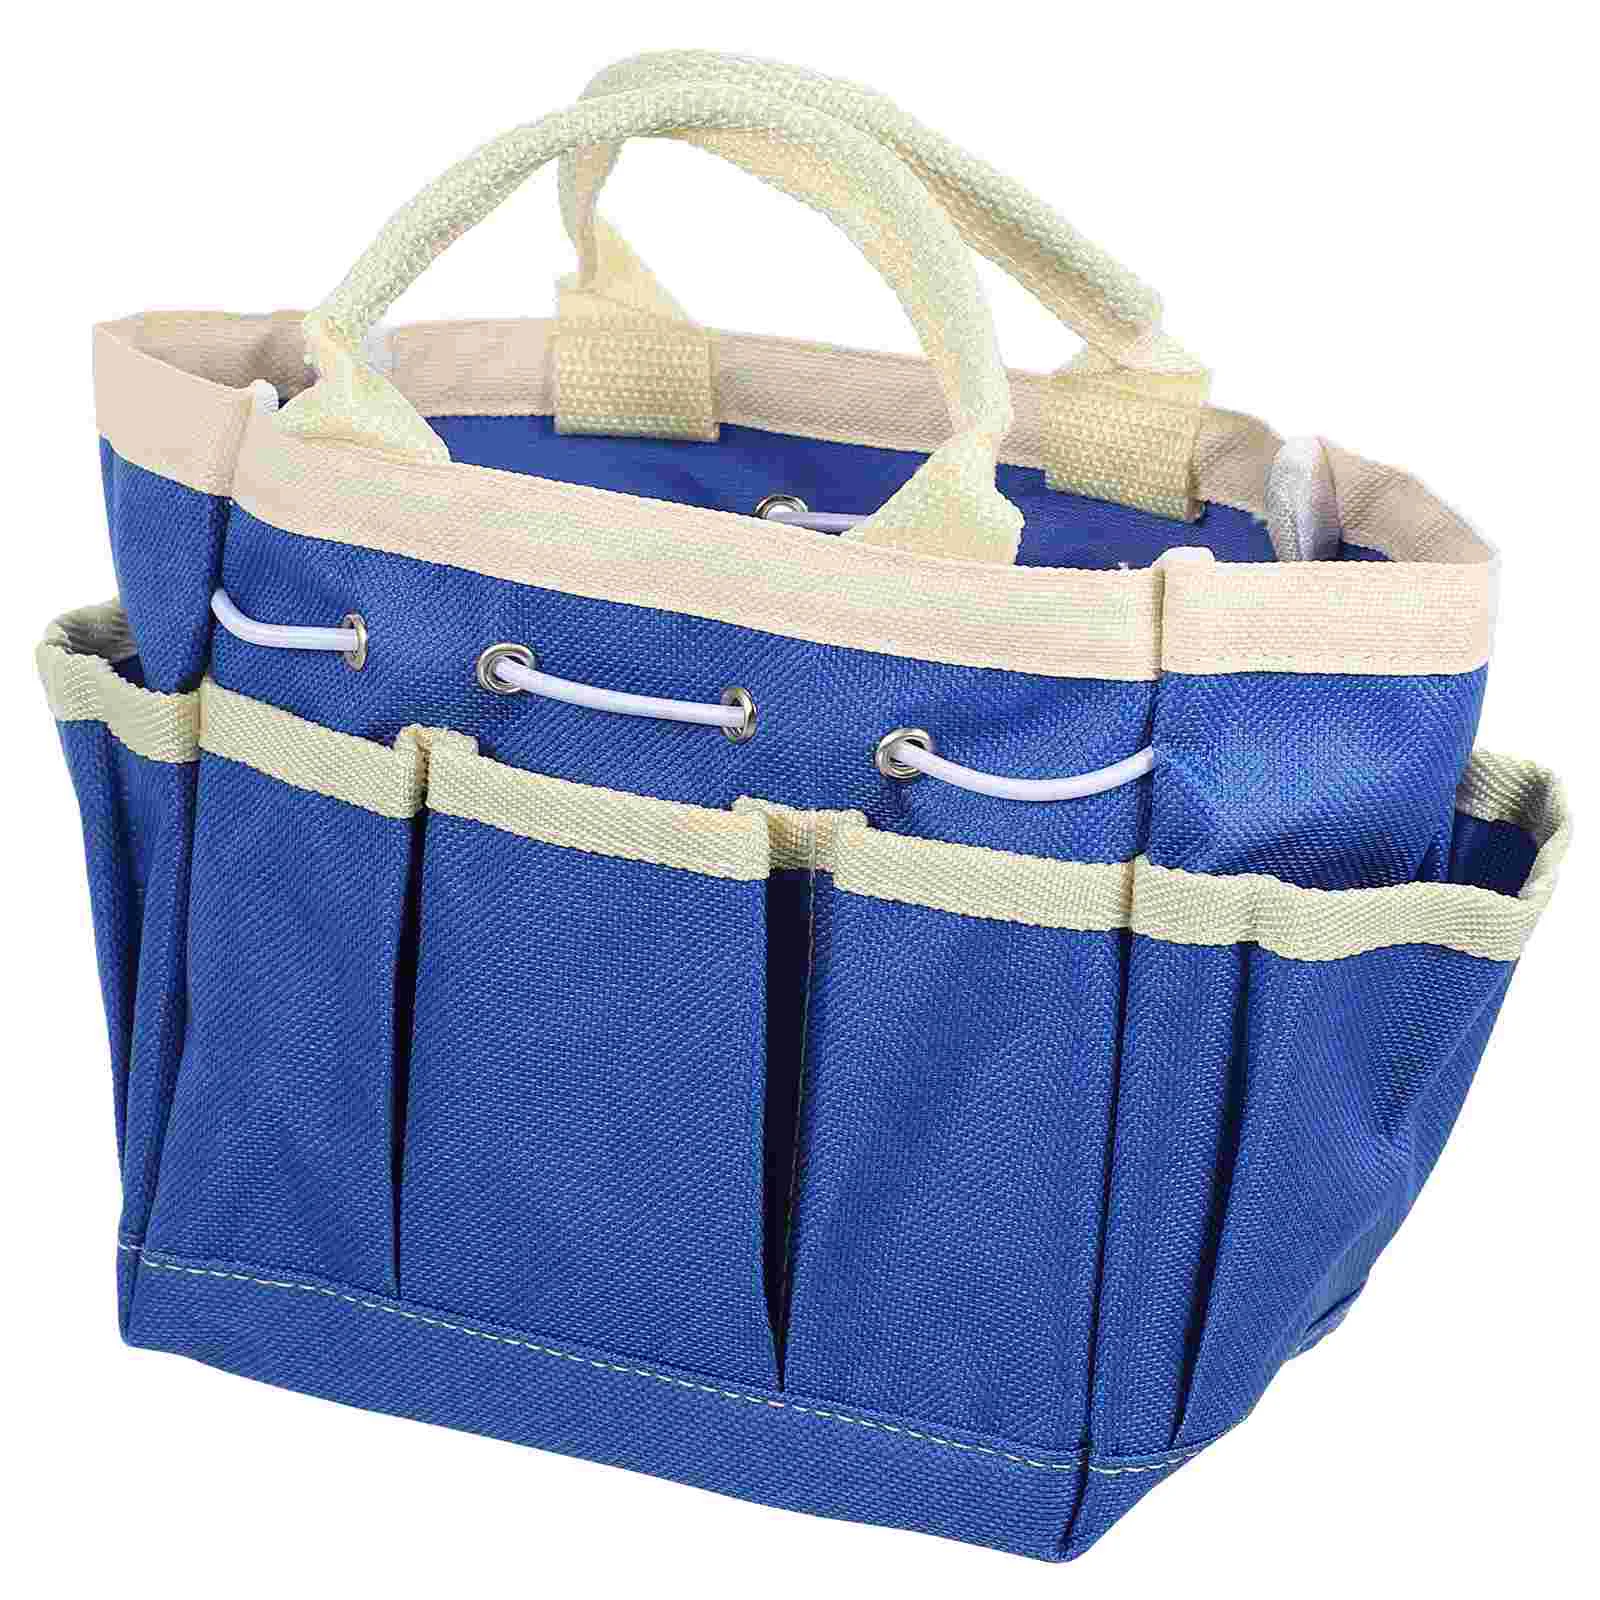 

Garden Tool Tote Storage Gardening Carrier Tools Organizer Pouch Portable Container Outdoor Leaf Blower Canvas Cloth Carry